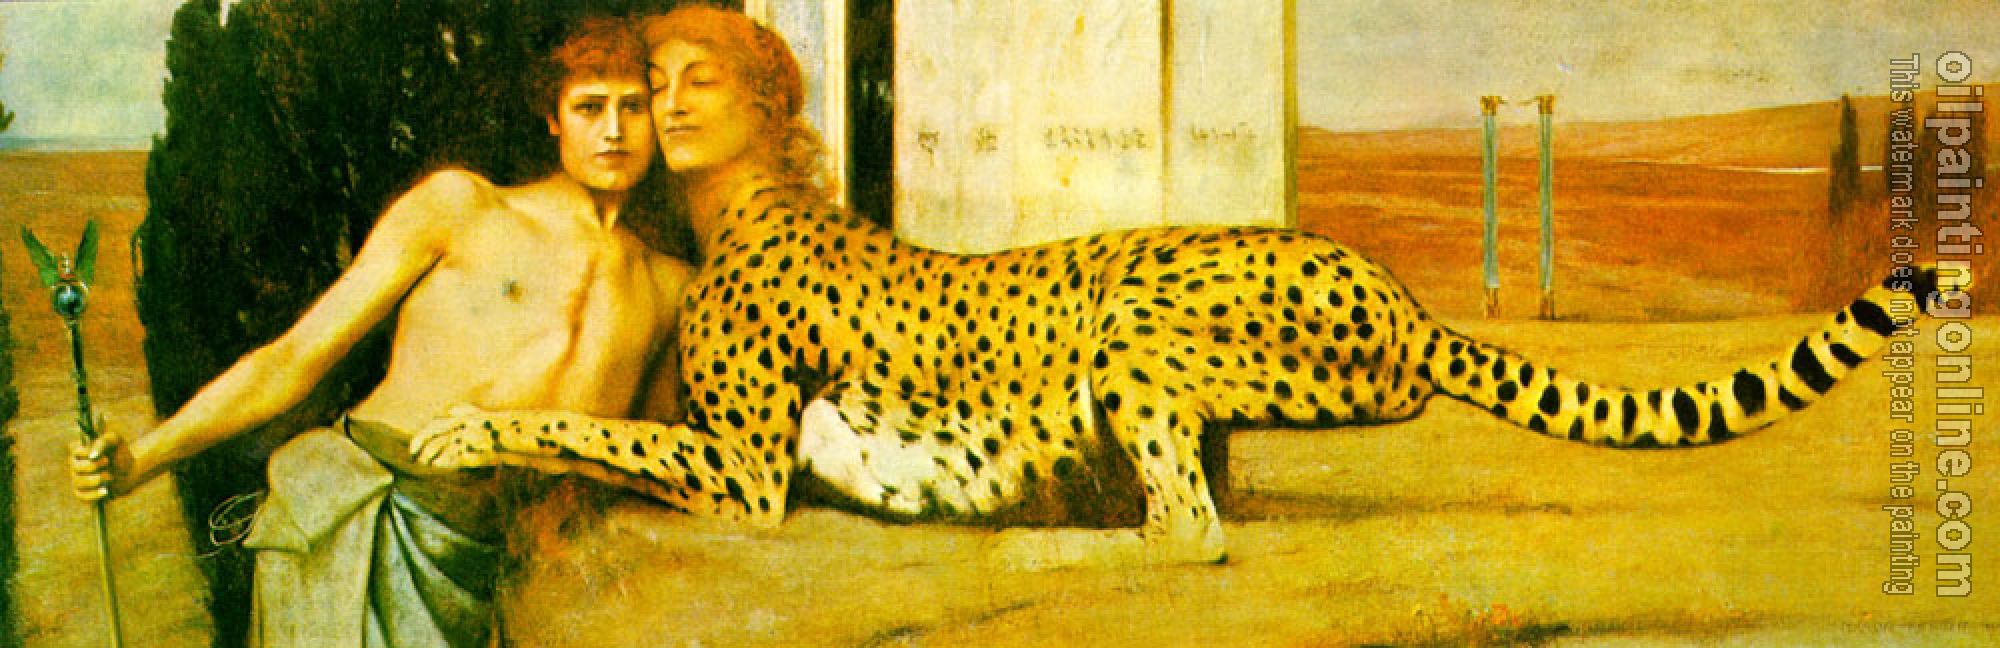 Khnopff, Fernand - The Caress